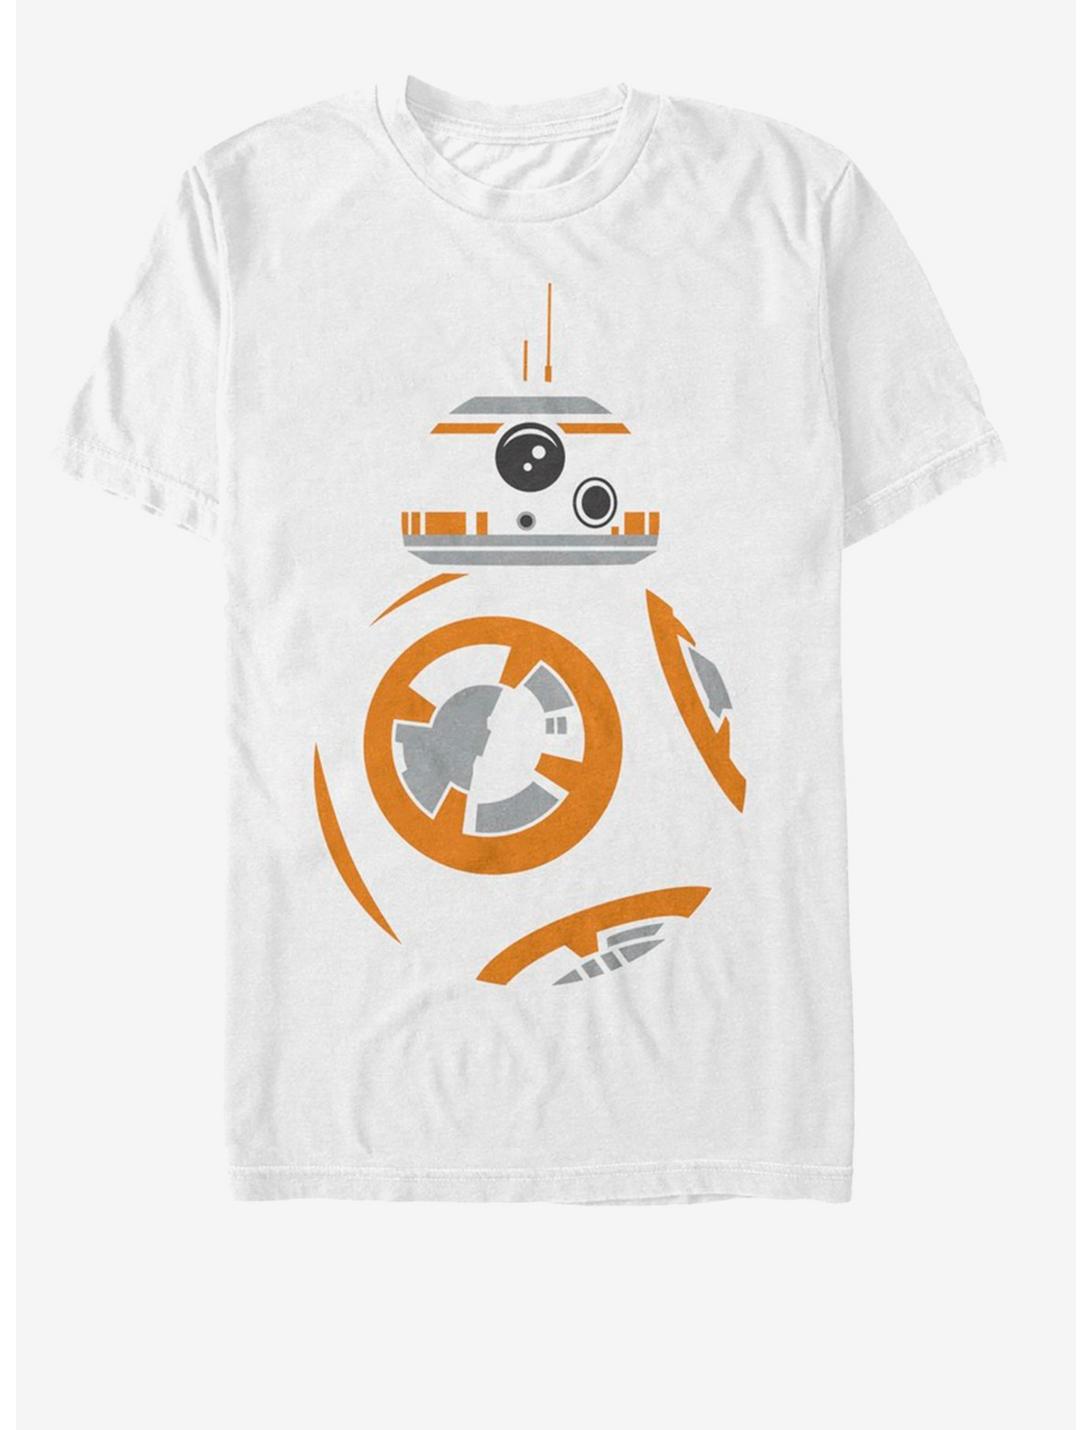 Star Wars The Force Awakens BB8 Face T-Shirt, WHITE, hi-res